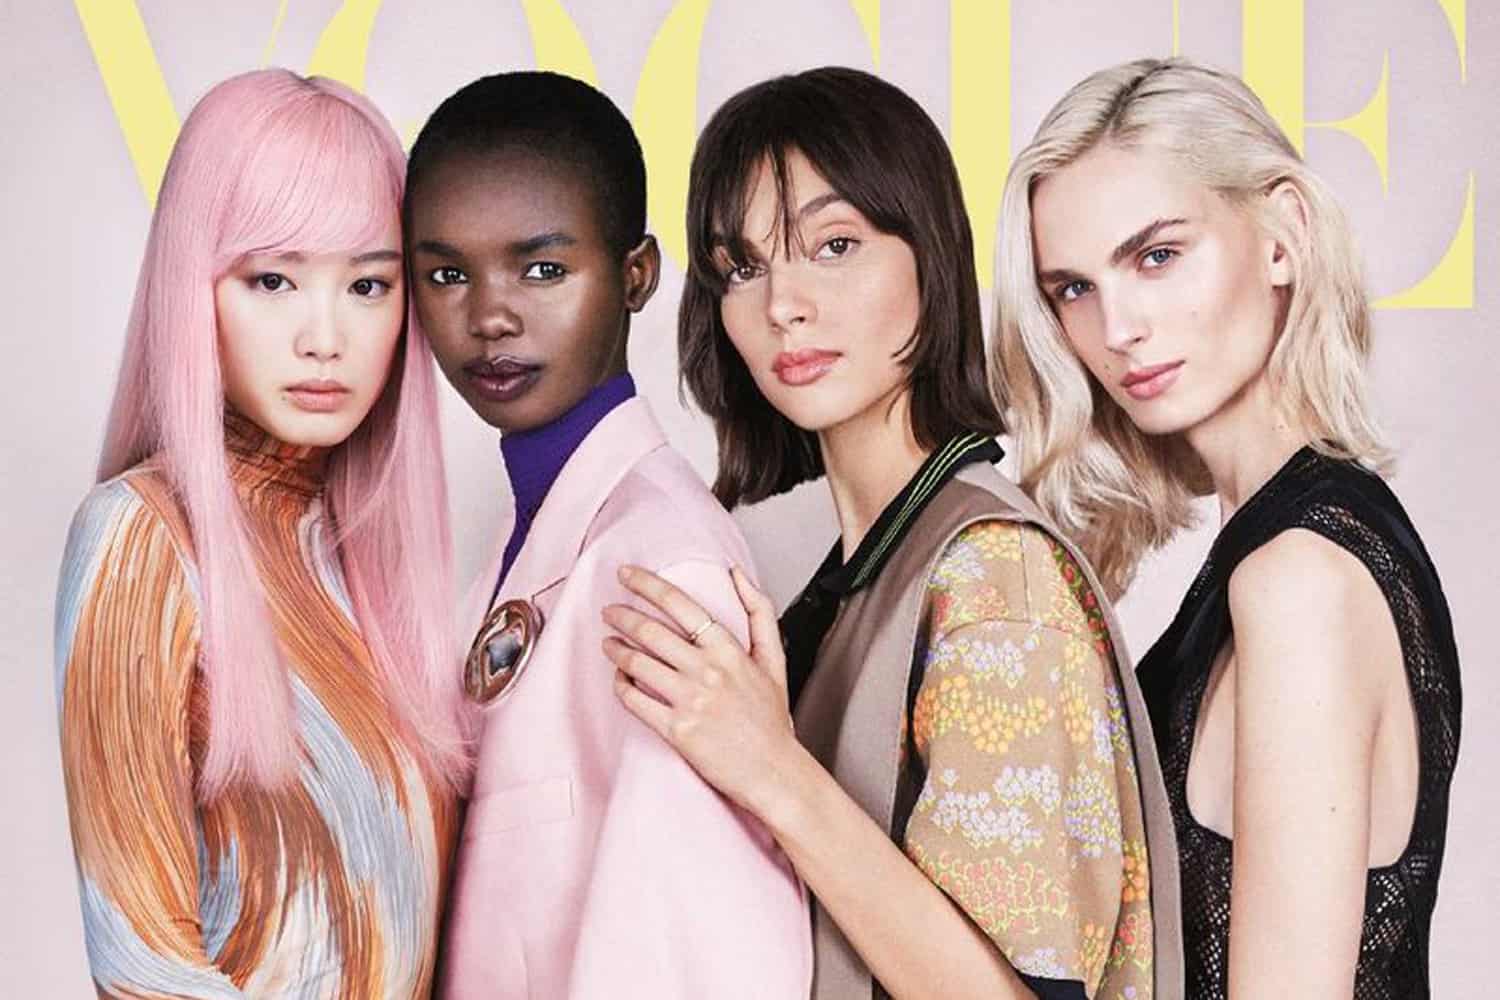 Transgender Non Binary Representation On Mag Covers Way Up In 2018